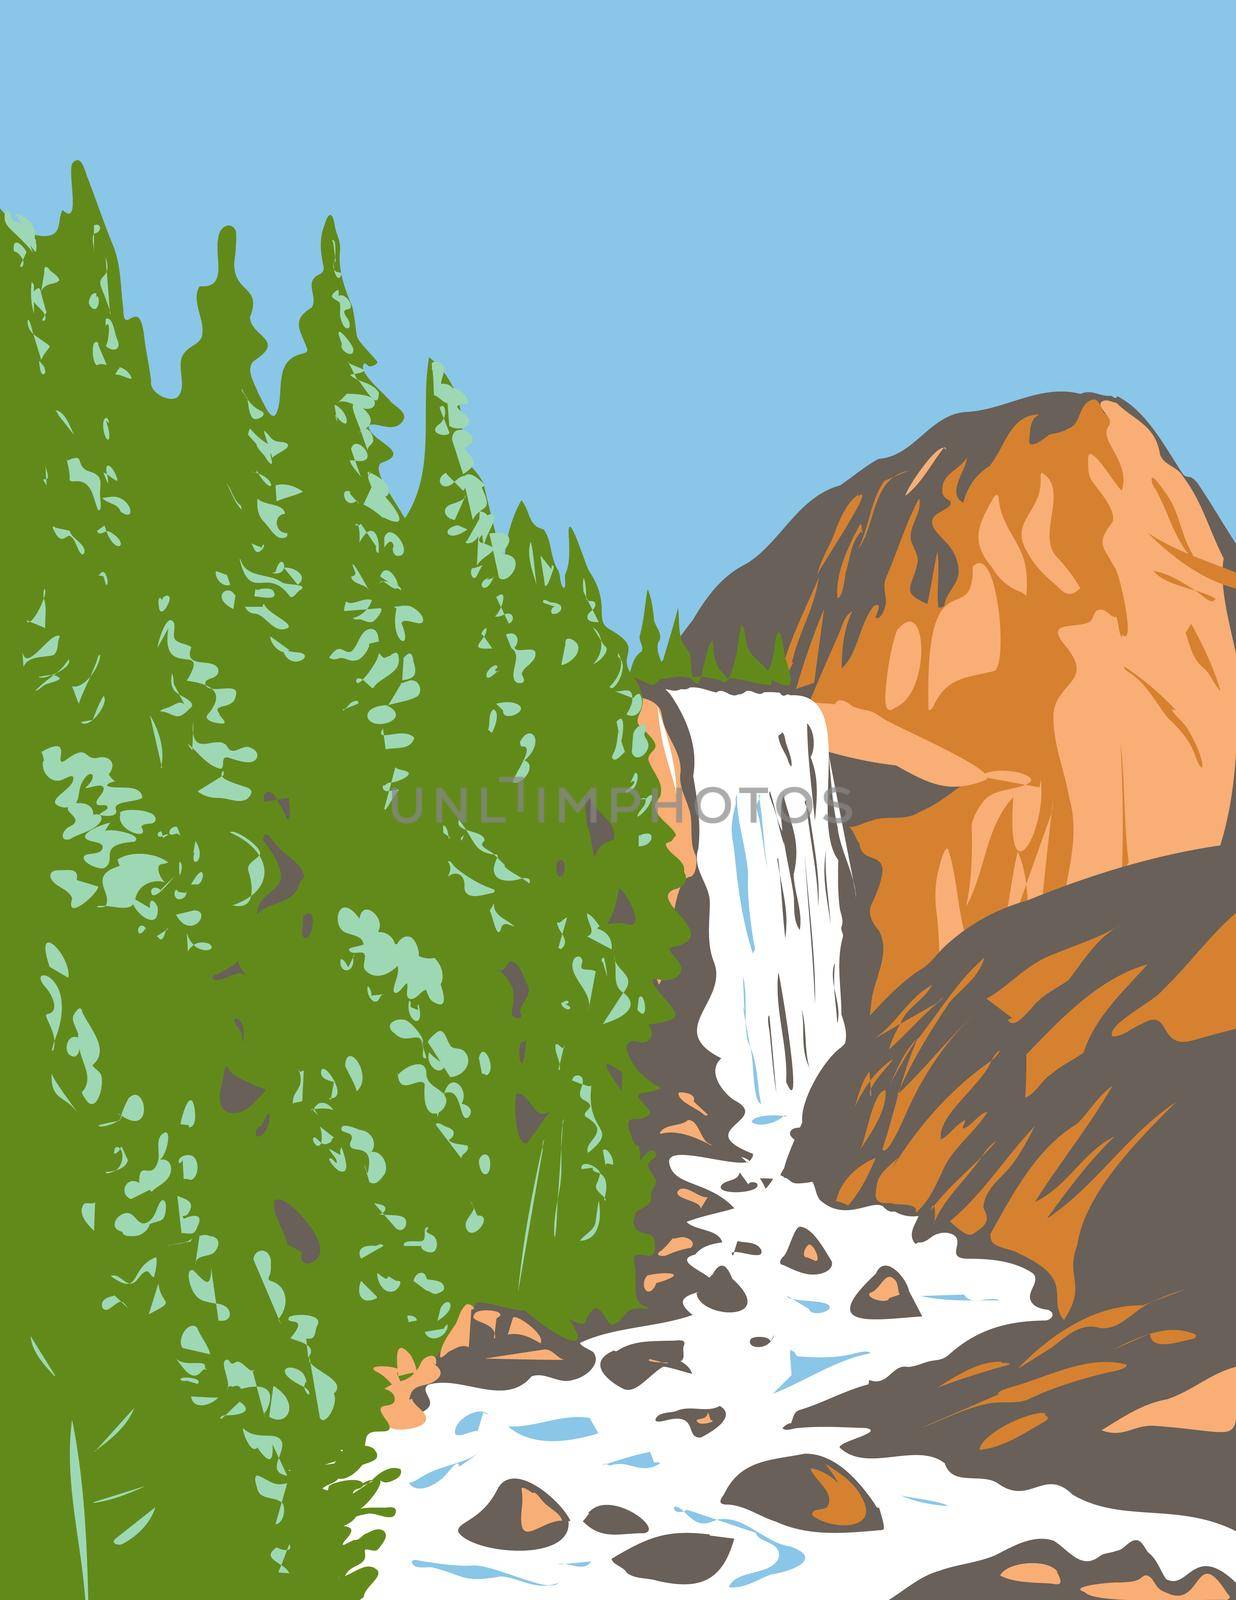 WPA poster art of Vernal Fall on the Merced River just downstream of Nevada Fall within Yosemite National Park, California USA done in works project administration style or federal art project style.